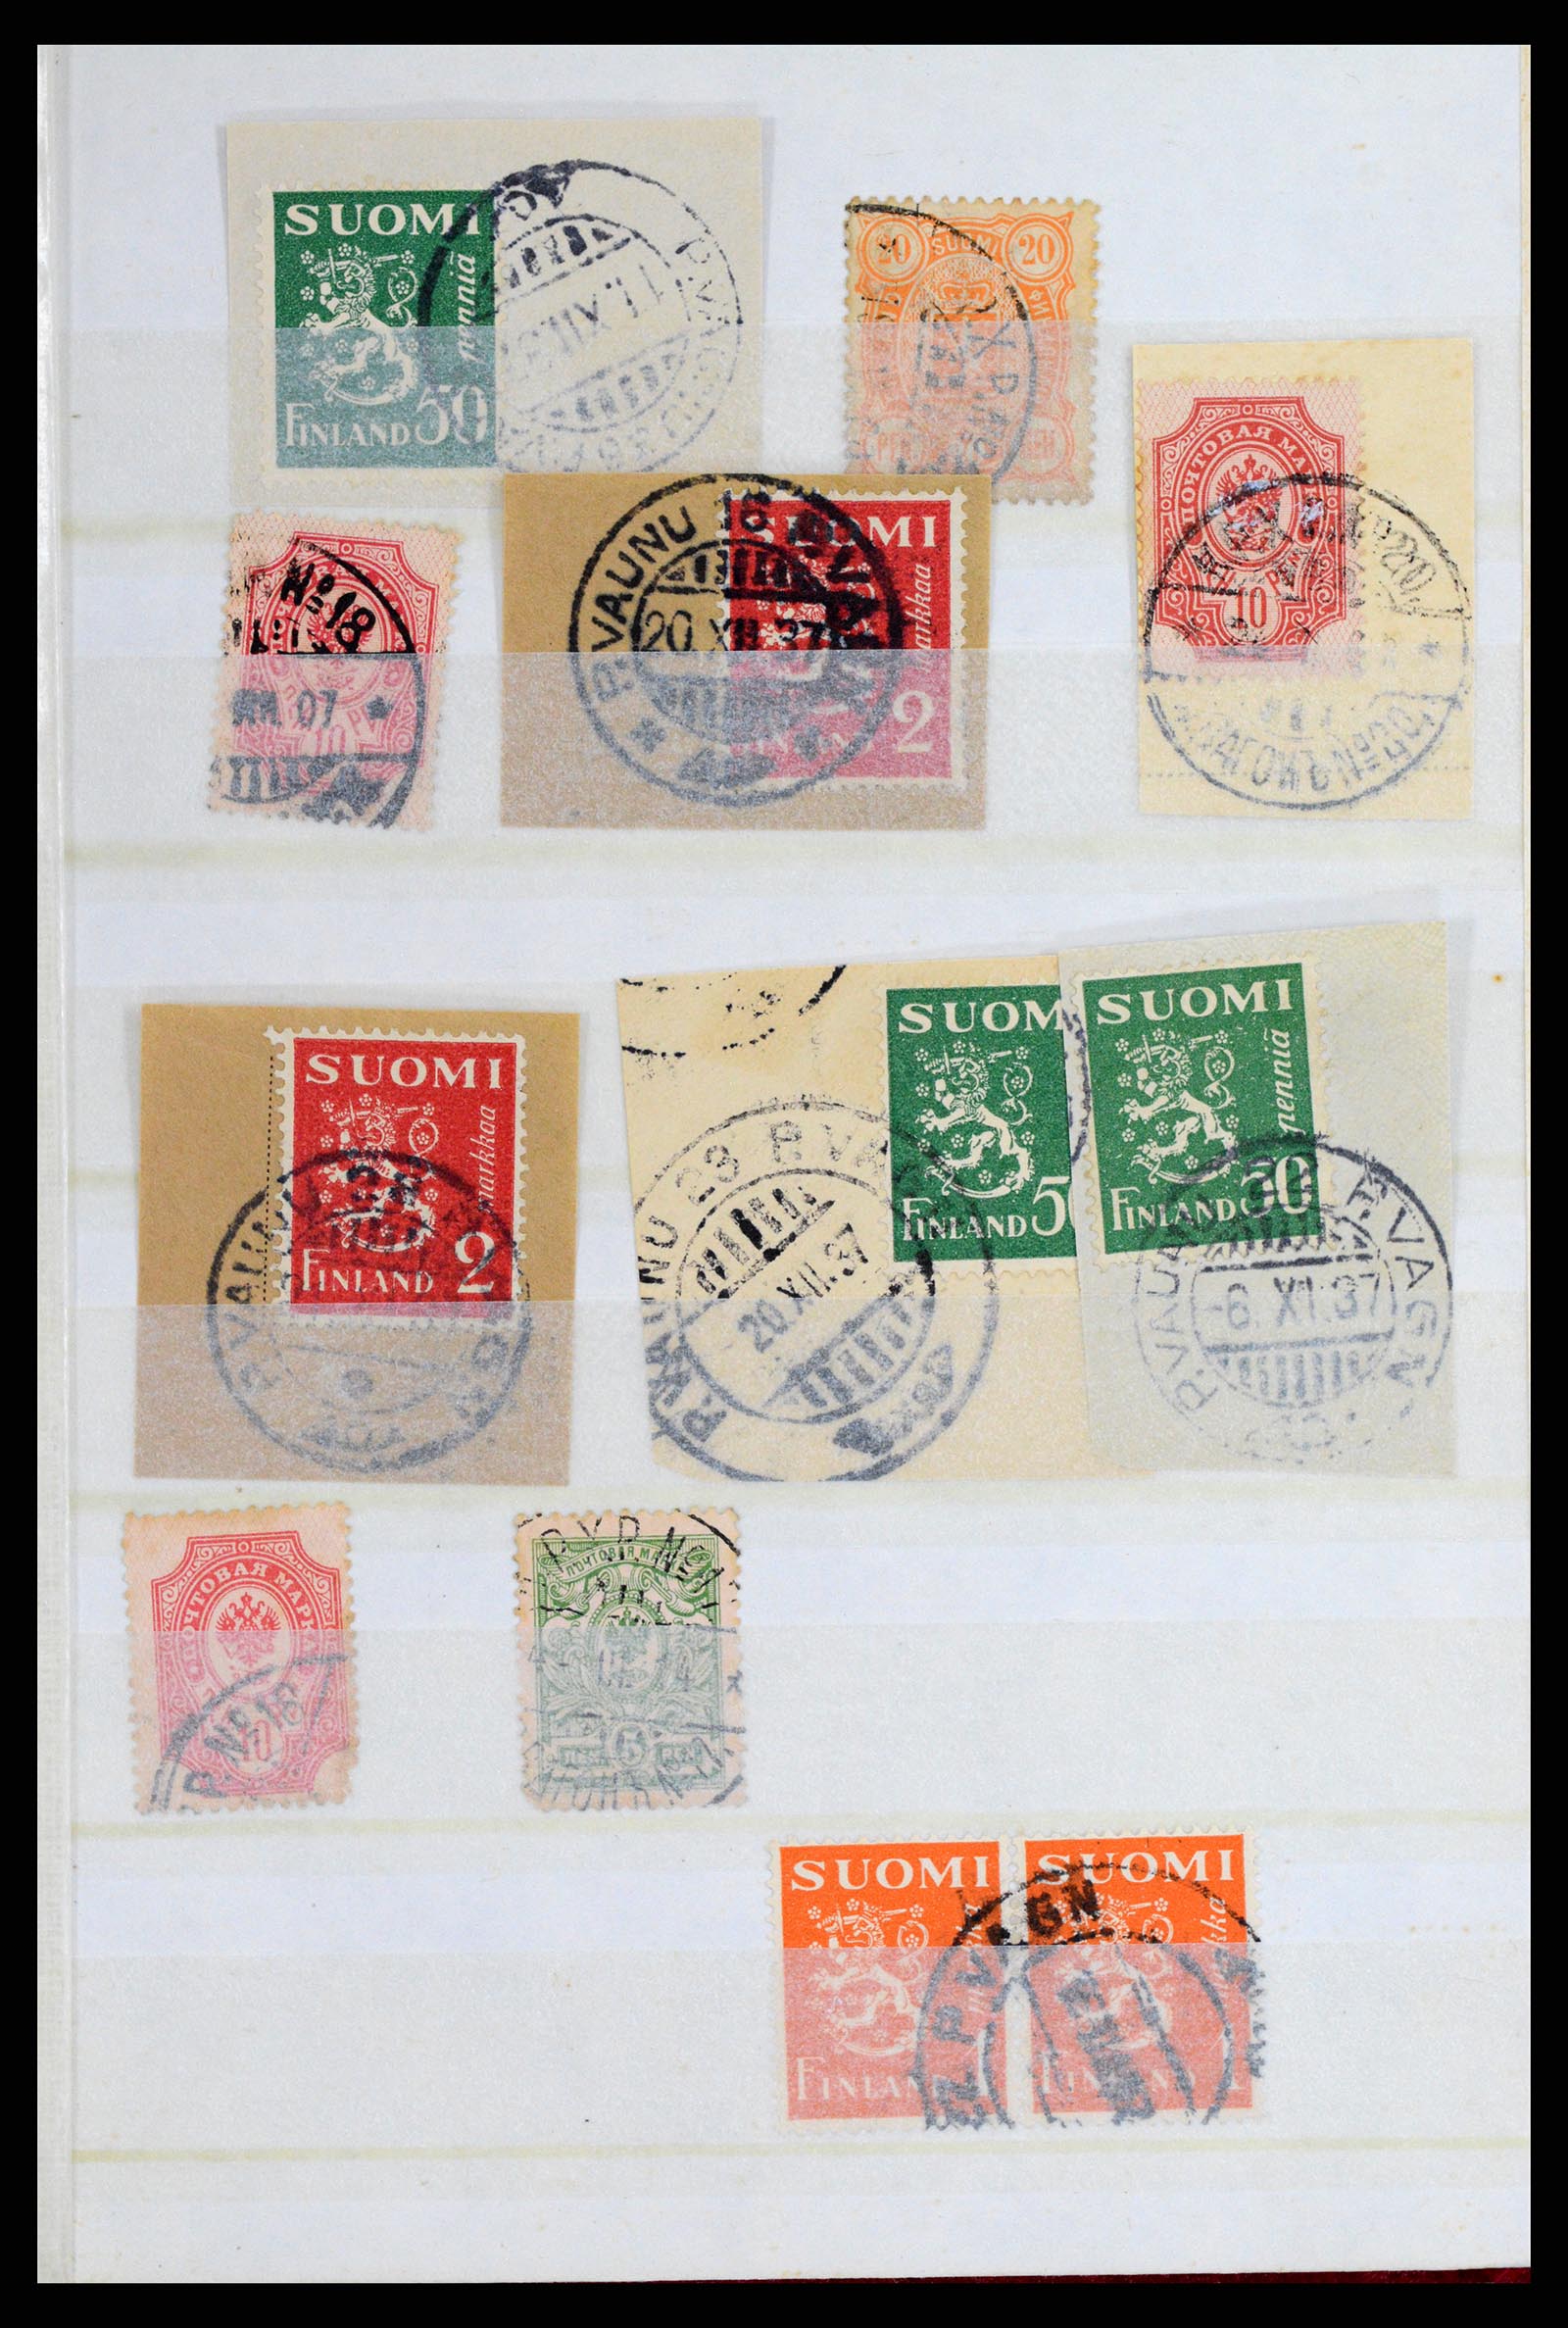 37766 170 - Stamp collection 37766 Finland railway cancellations 1870-1950.